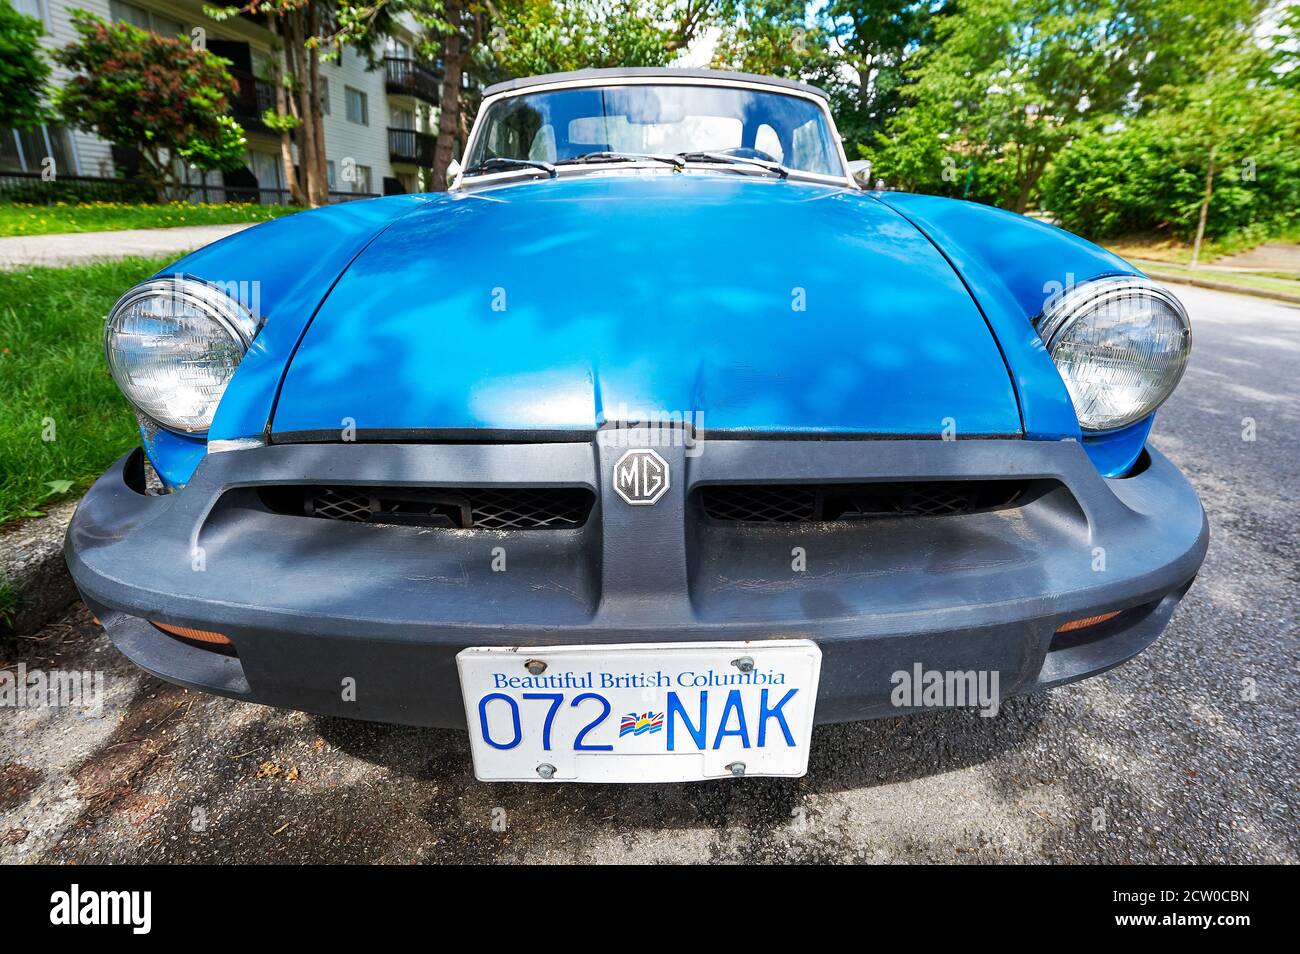 Isolated front view of a blue colored 1975 North American rubber bumper MG MGB convertible MG sports car seen in Vancouver, British Columbia, Canada Stock Photo